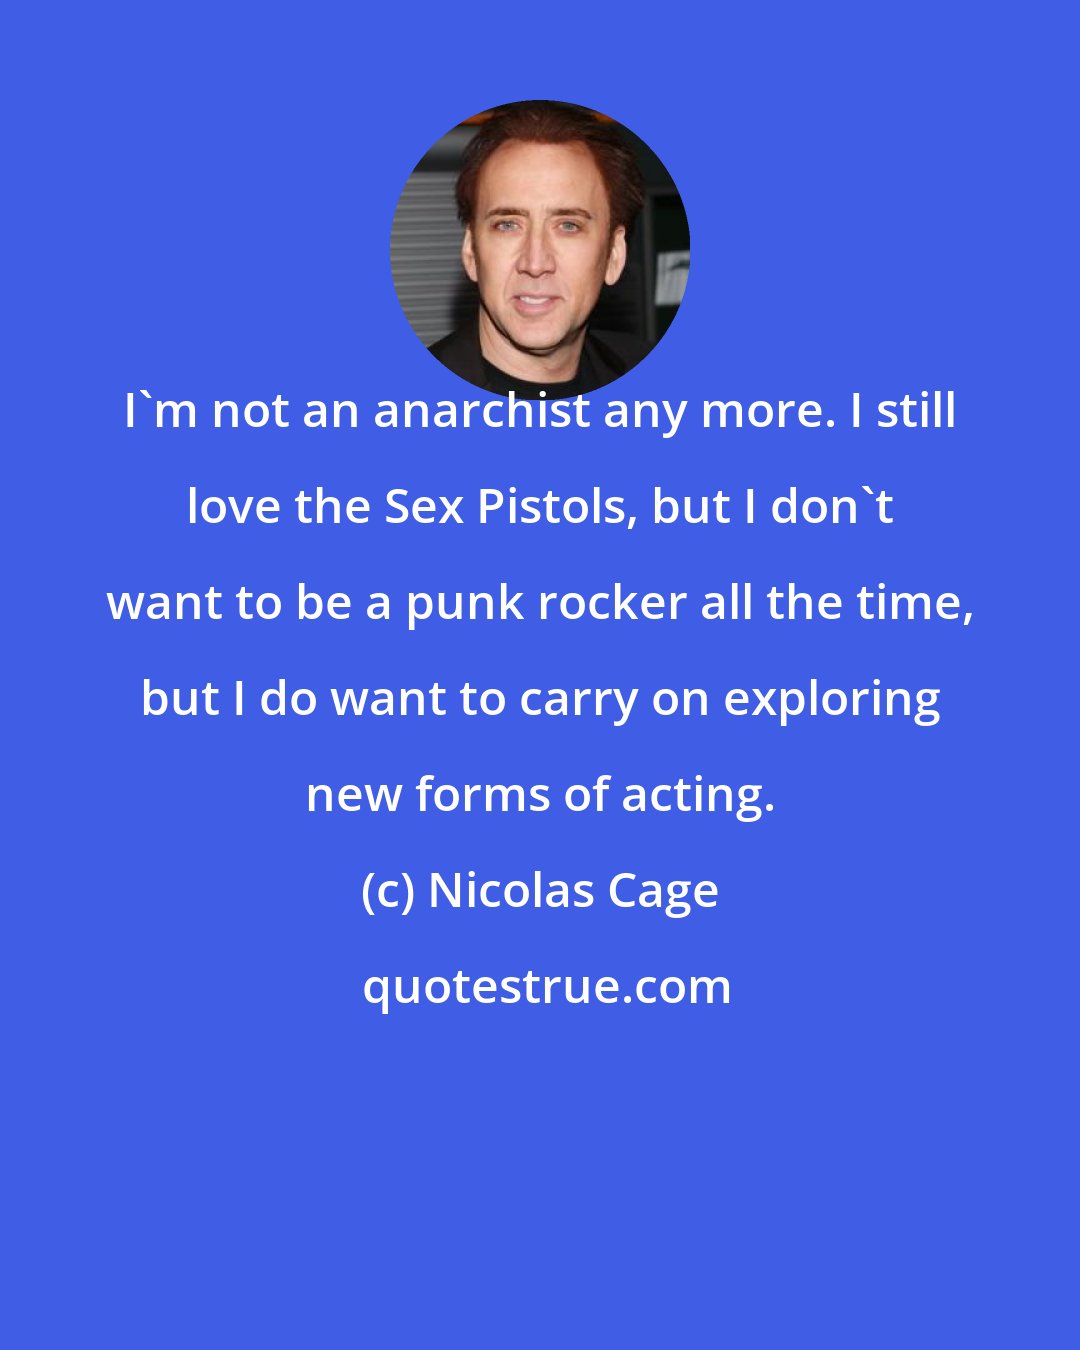 Nicolas Cage: I'm not an anarchist any more. I still love the Sex Pistols, but I don't want to be a punk rocker all the time, but I do want to carry on exploring new forms of acting.